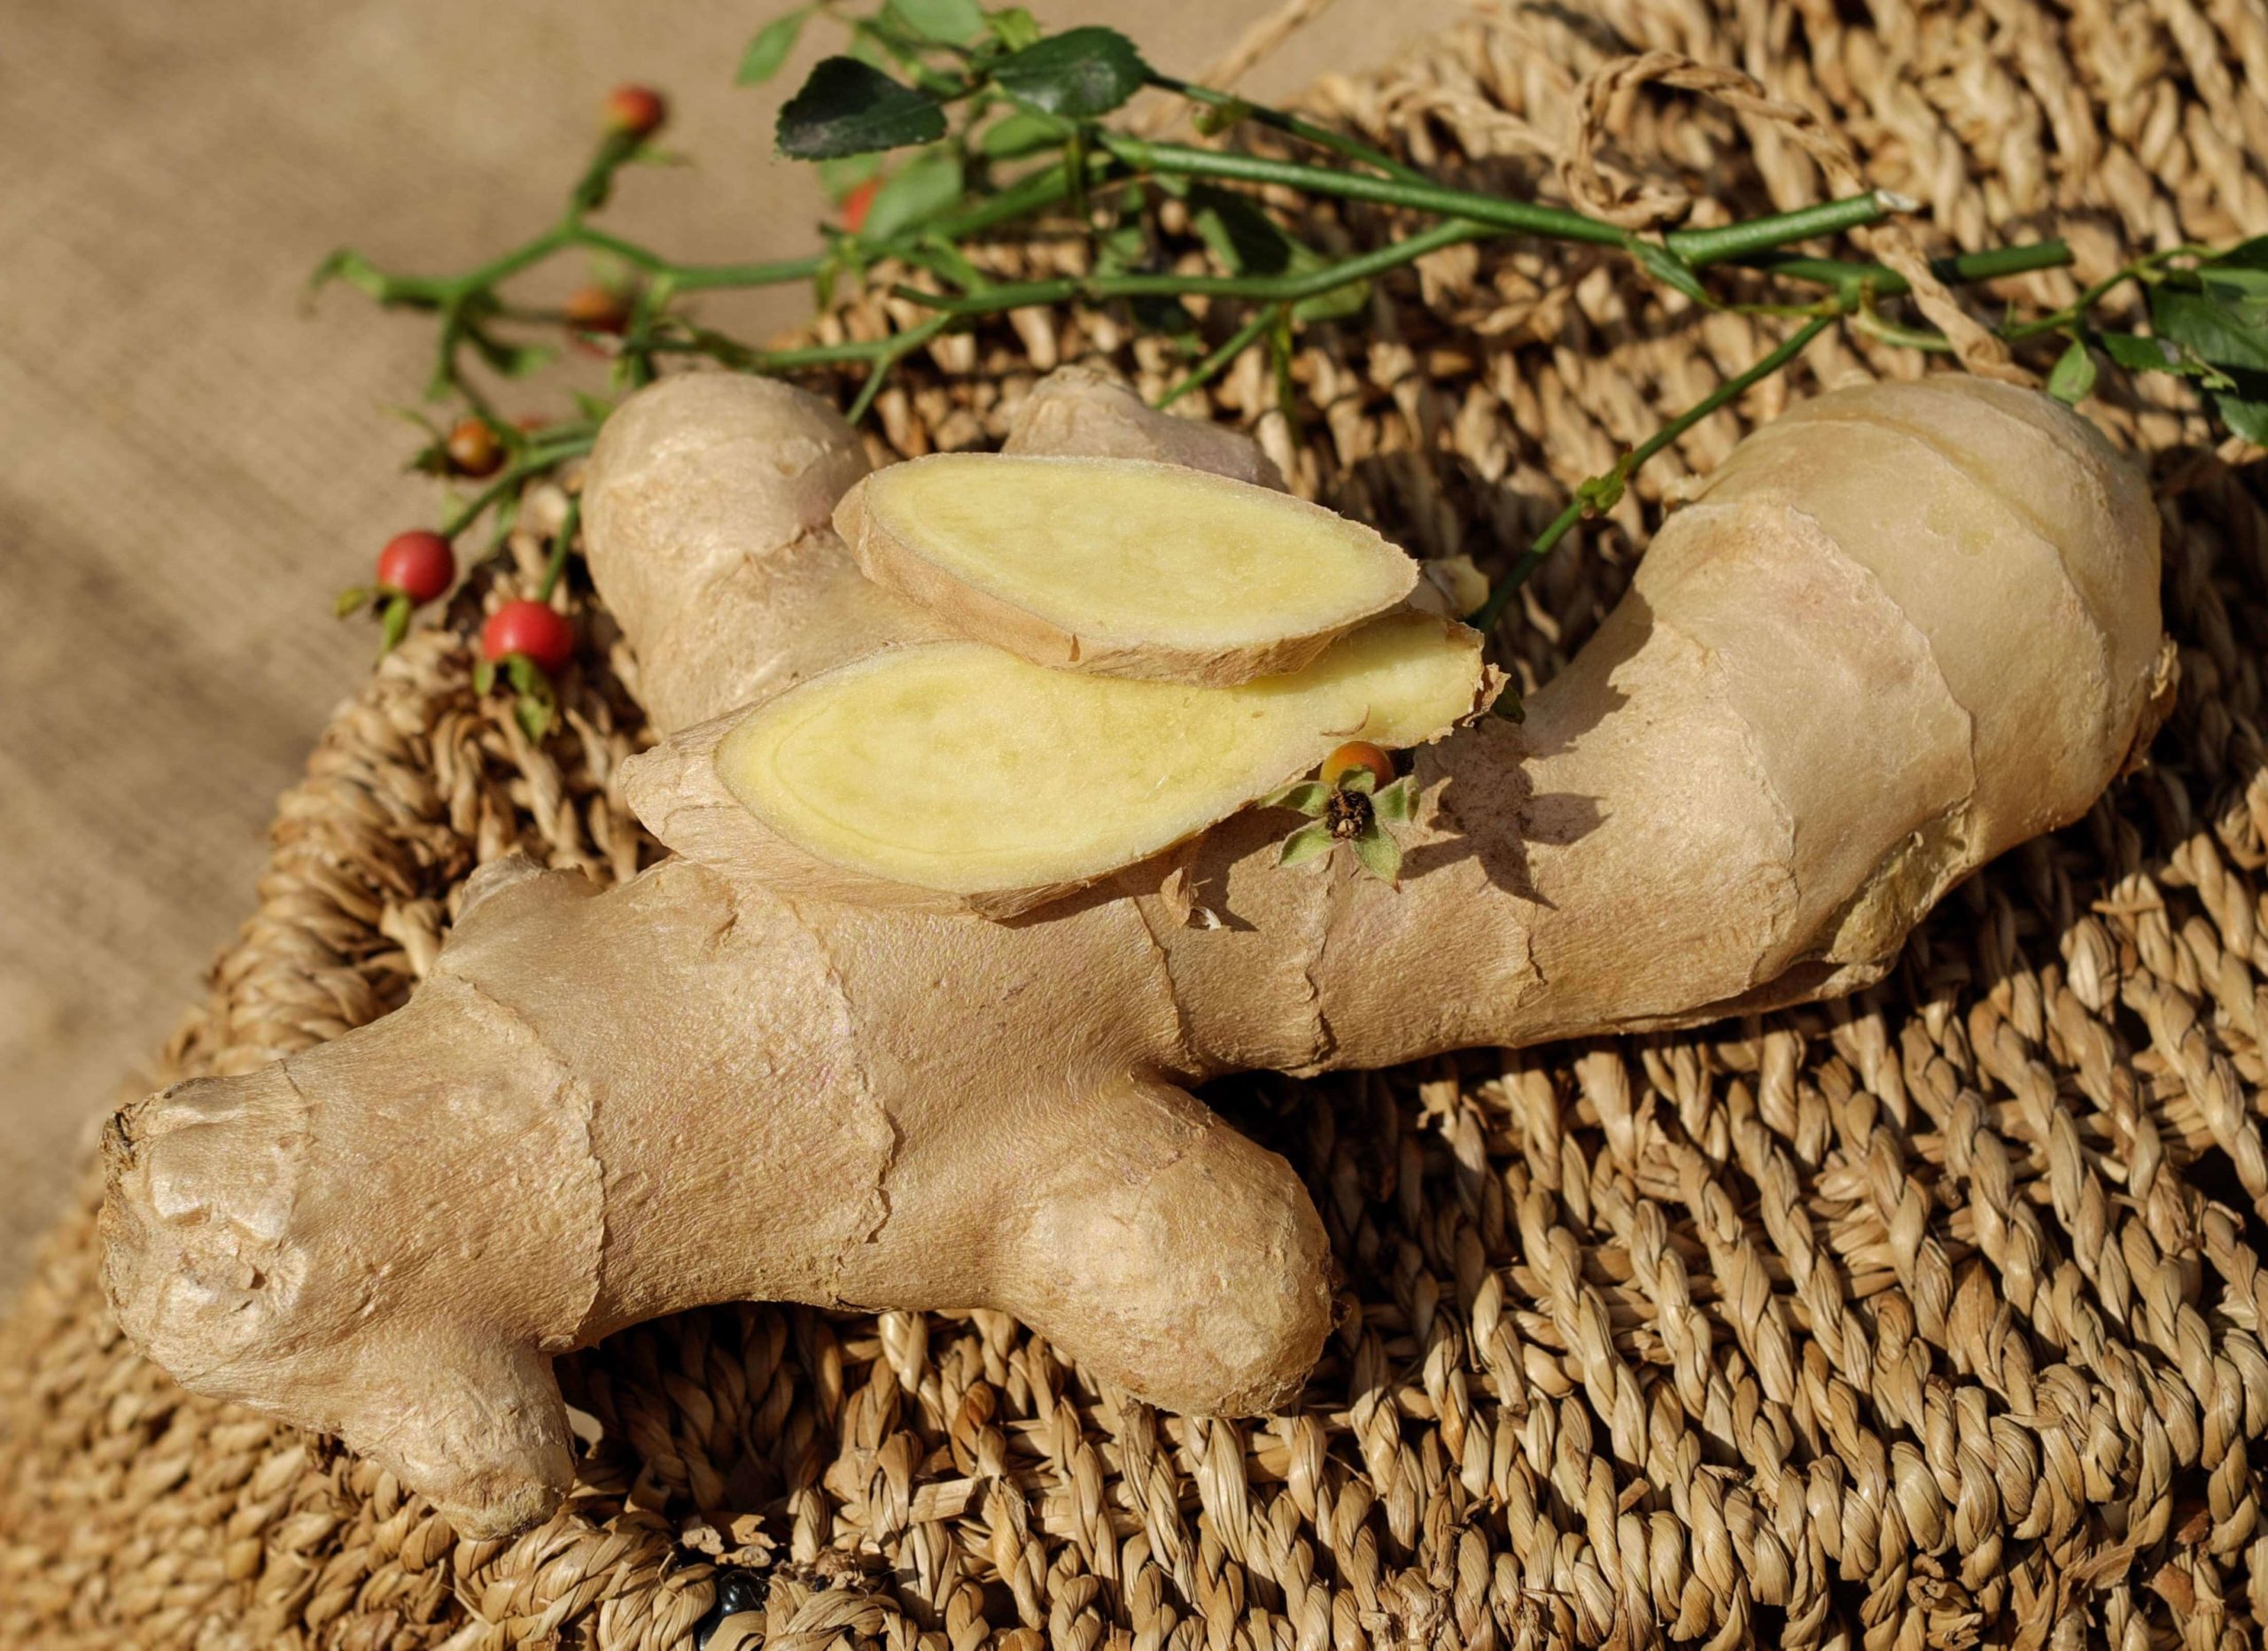 Ginger not only adds great flavor to food, but also has numerous health benefits and anti-inflammatory, anti-oxidant & anti-tumor properties.